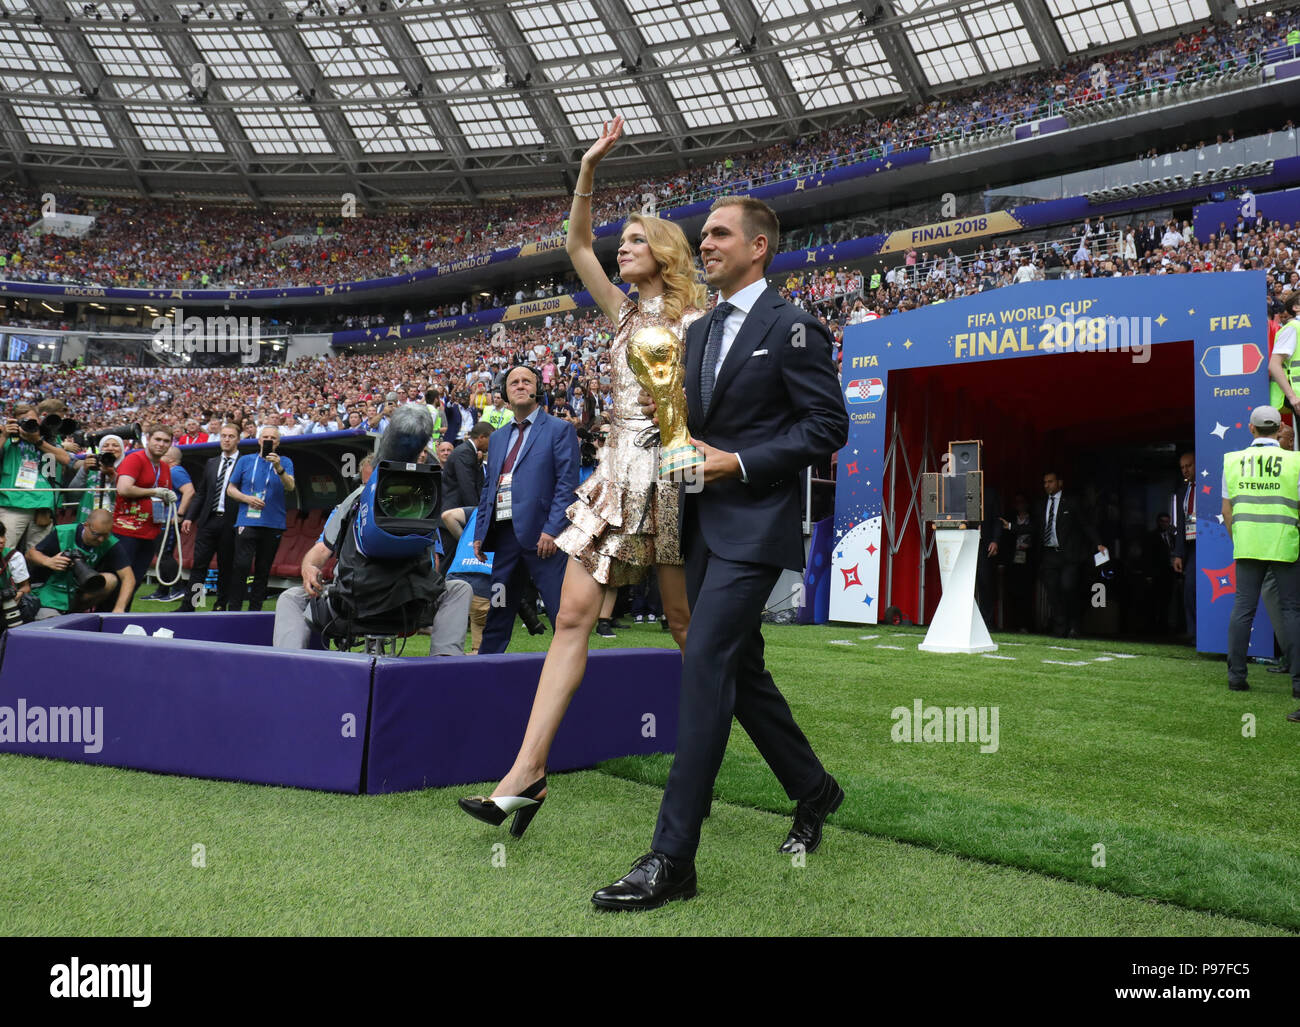 Moscow, Russia. 15th July, 2018. Soccer, World Cup 2018: Final game, France vs. Croatia at the Luzhniki Stadium. Germany's Philipp Lahm, 2014 World Champion, presenting the World Cup ahead of the starting whistle. Credit: Christian Charisius/dpa/Alamy Live News Stock Photo